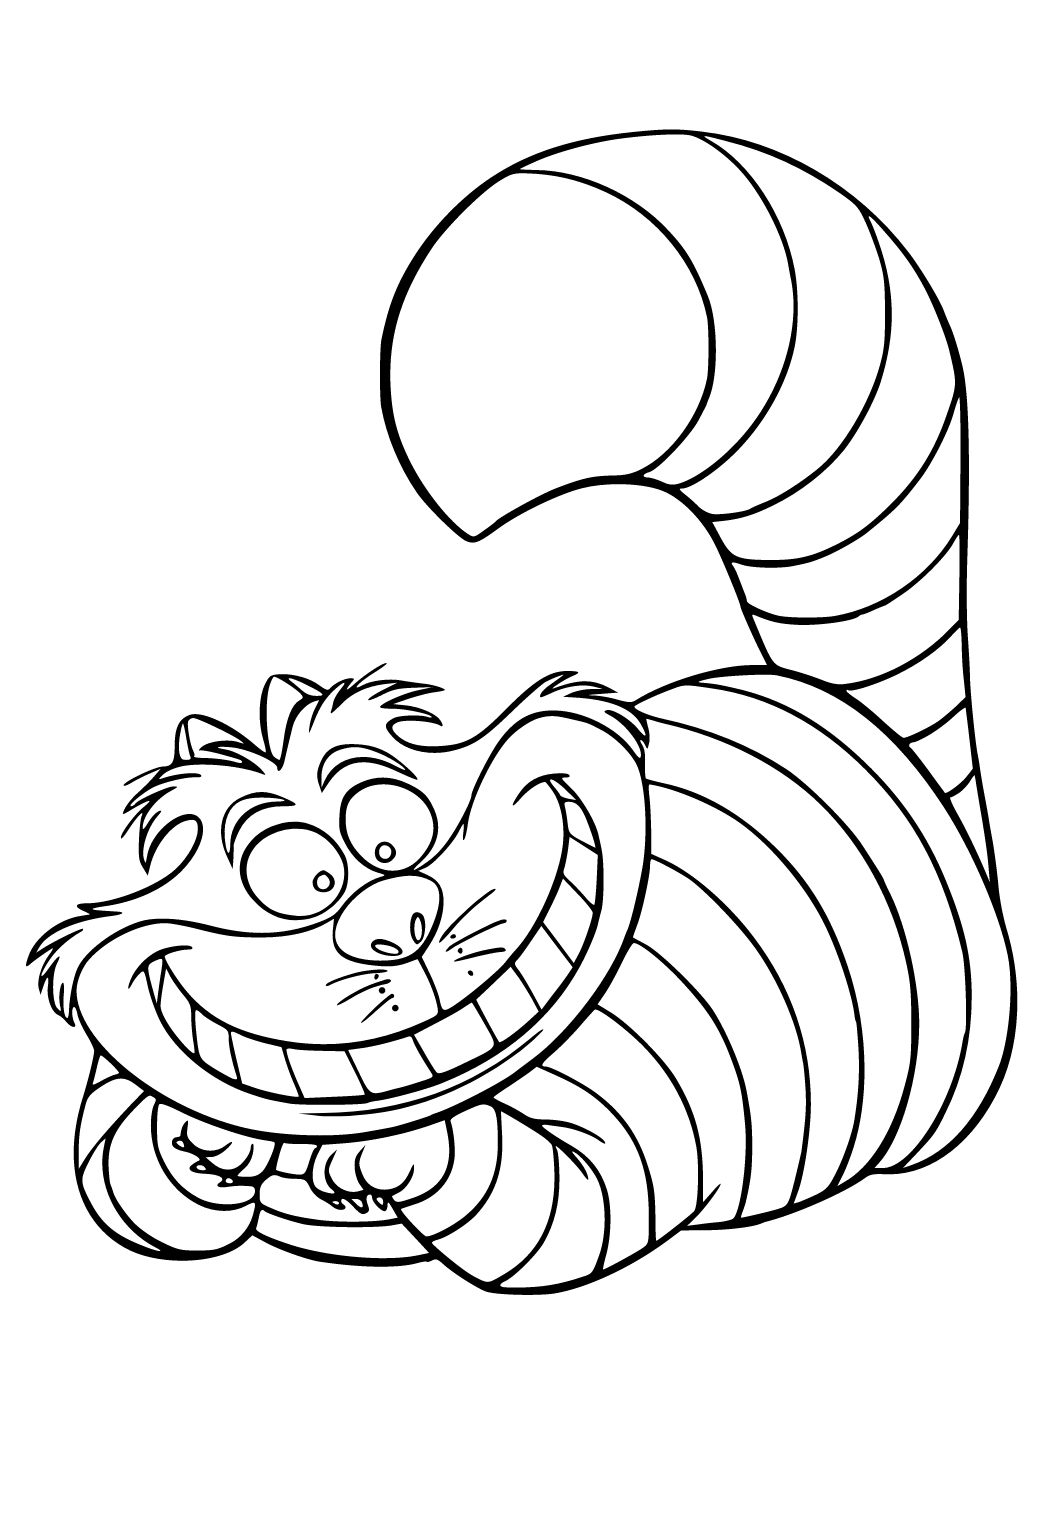 Free printable funny cat coloring page sheet and picture for adults and kids girls and boys